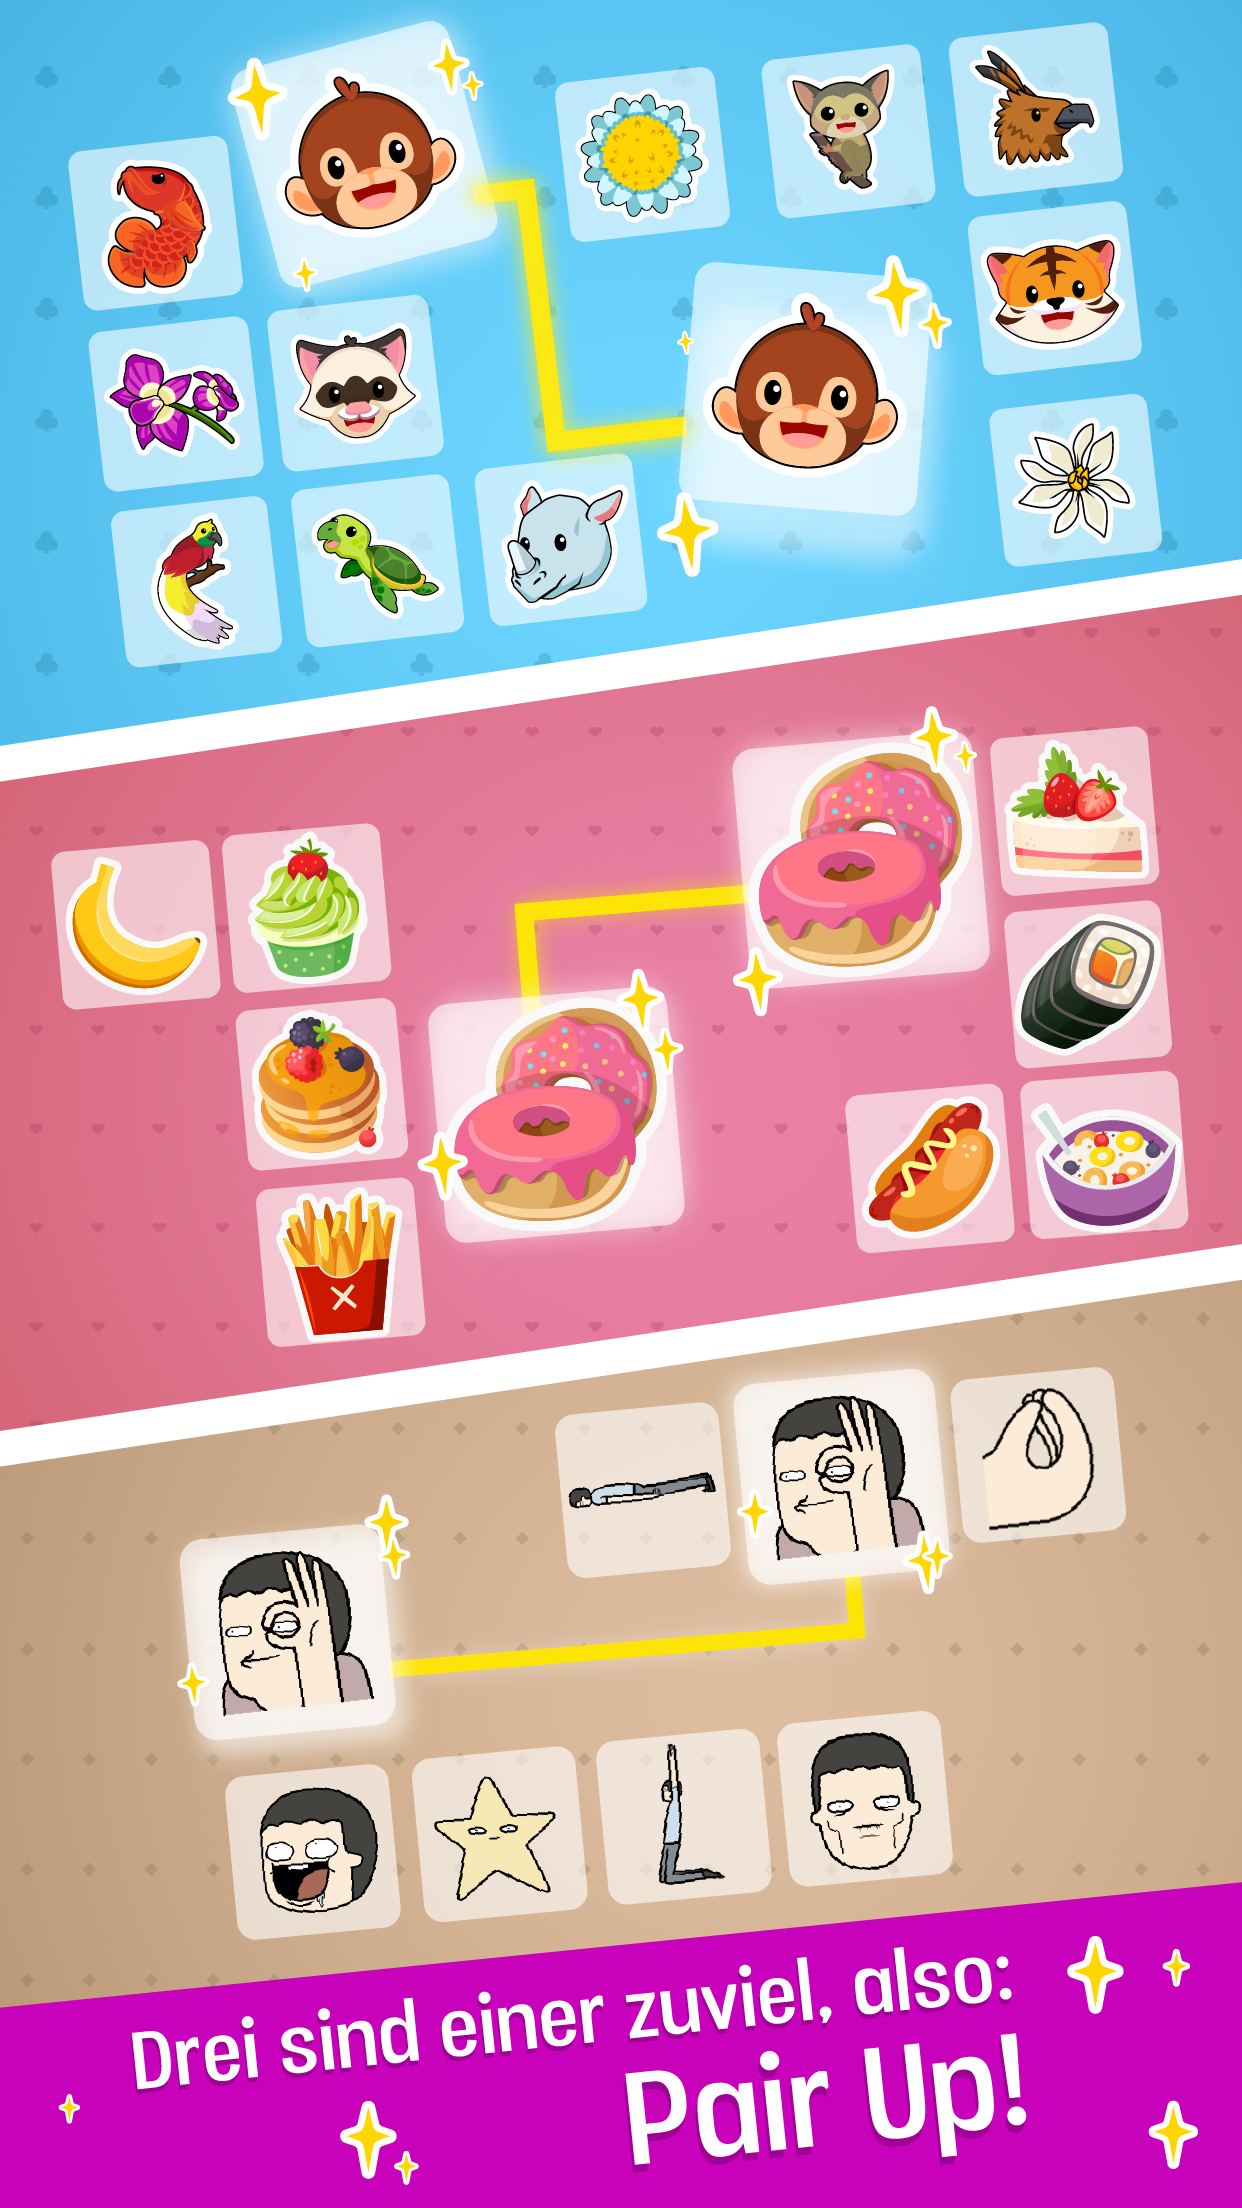 Screenshot 1 of Pair Up: Match Two Puzzlespiel 3.6.5.0.1